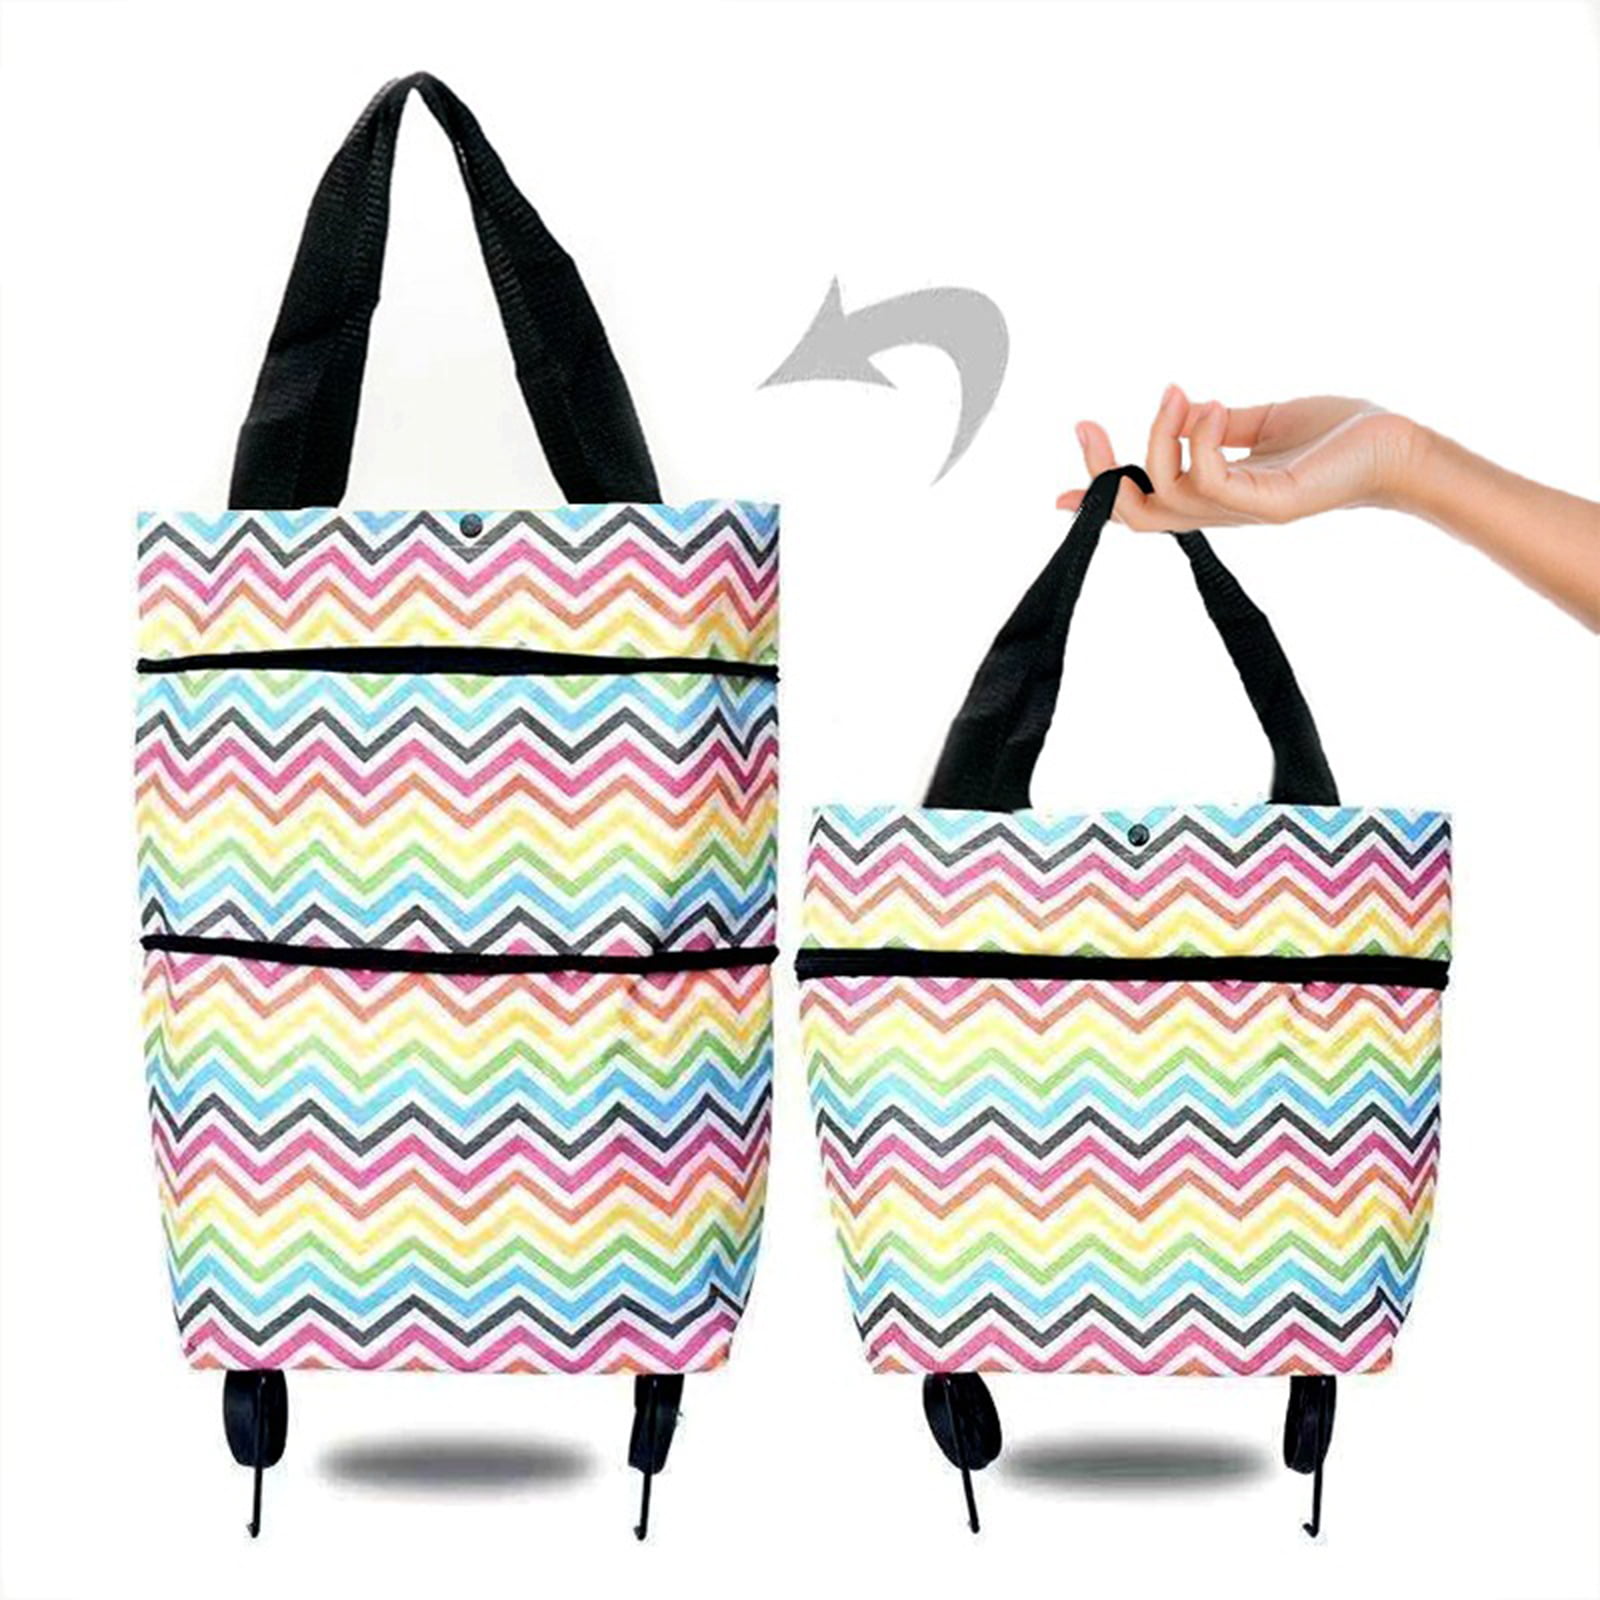 Details about   Foldable Buy Vegetables Bag Portable Shopping Trolley Case Pull Cart with Wheels 